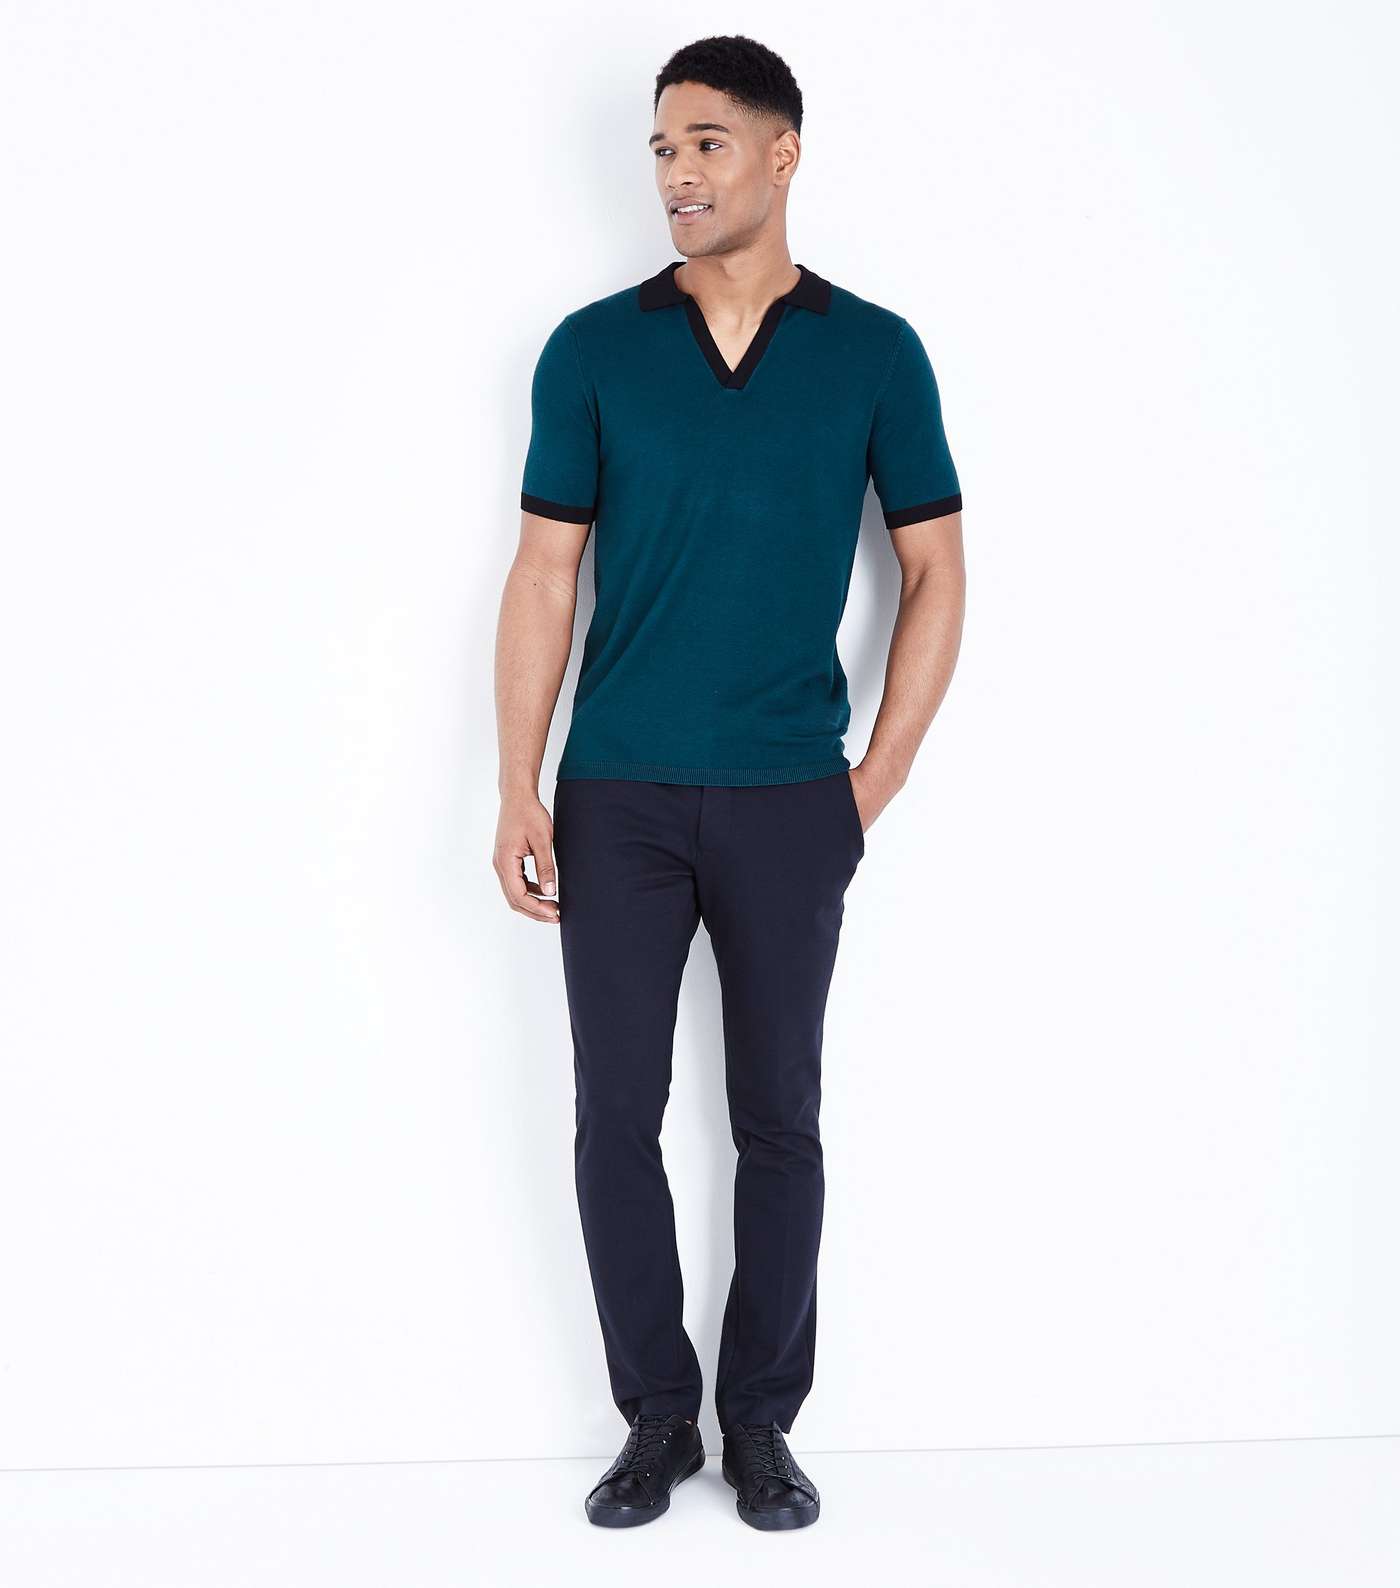 Teal White Revere Collar Knit Polo Shirt Image 2